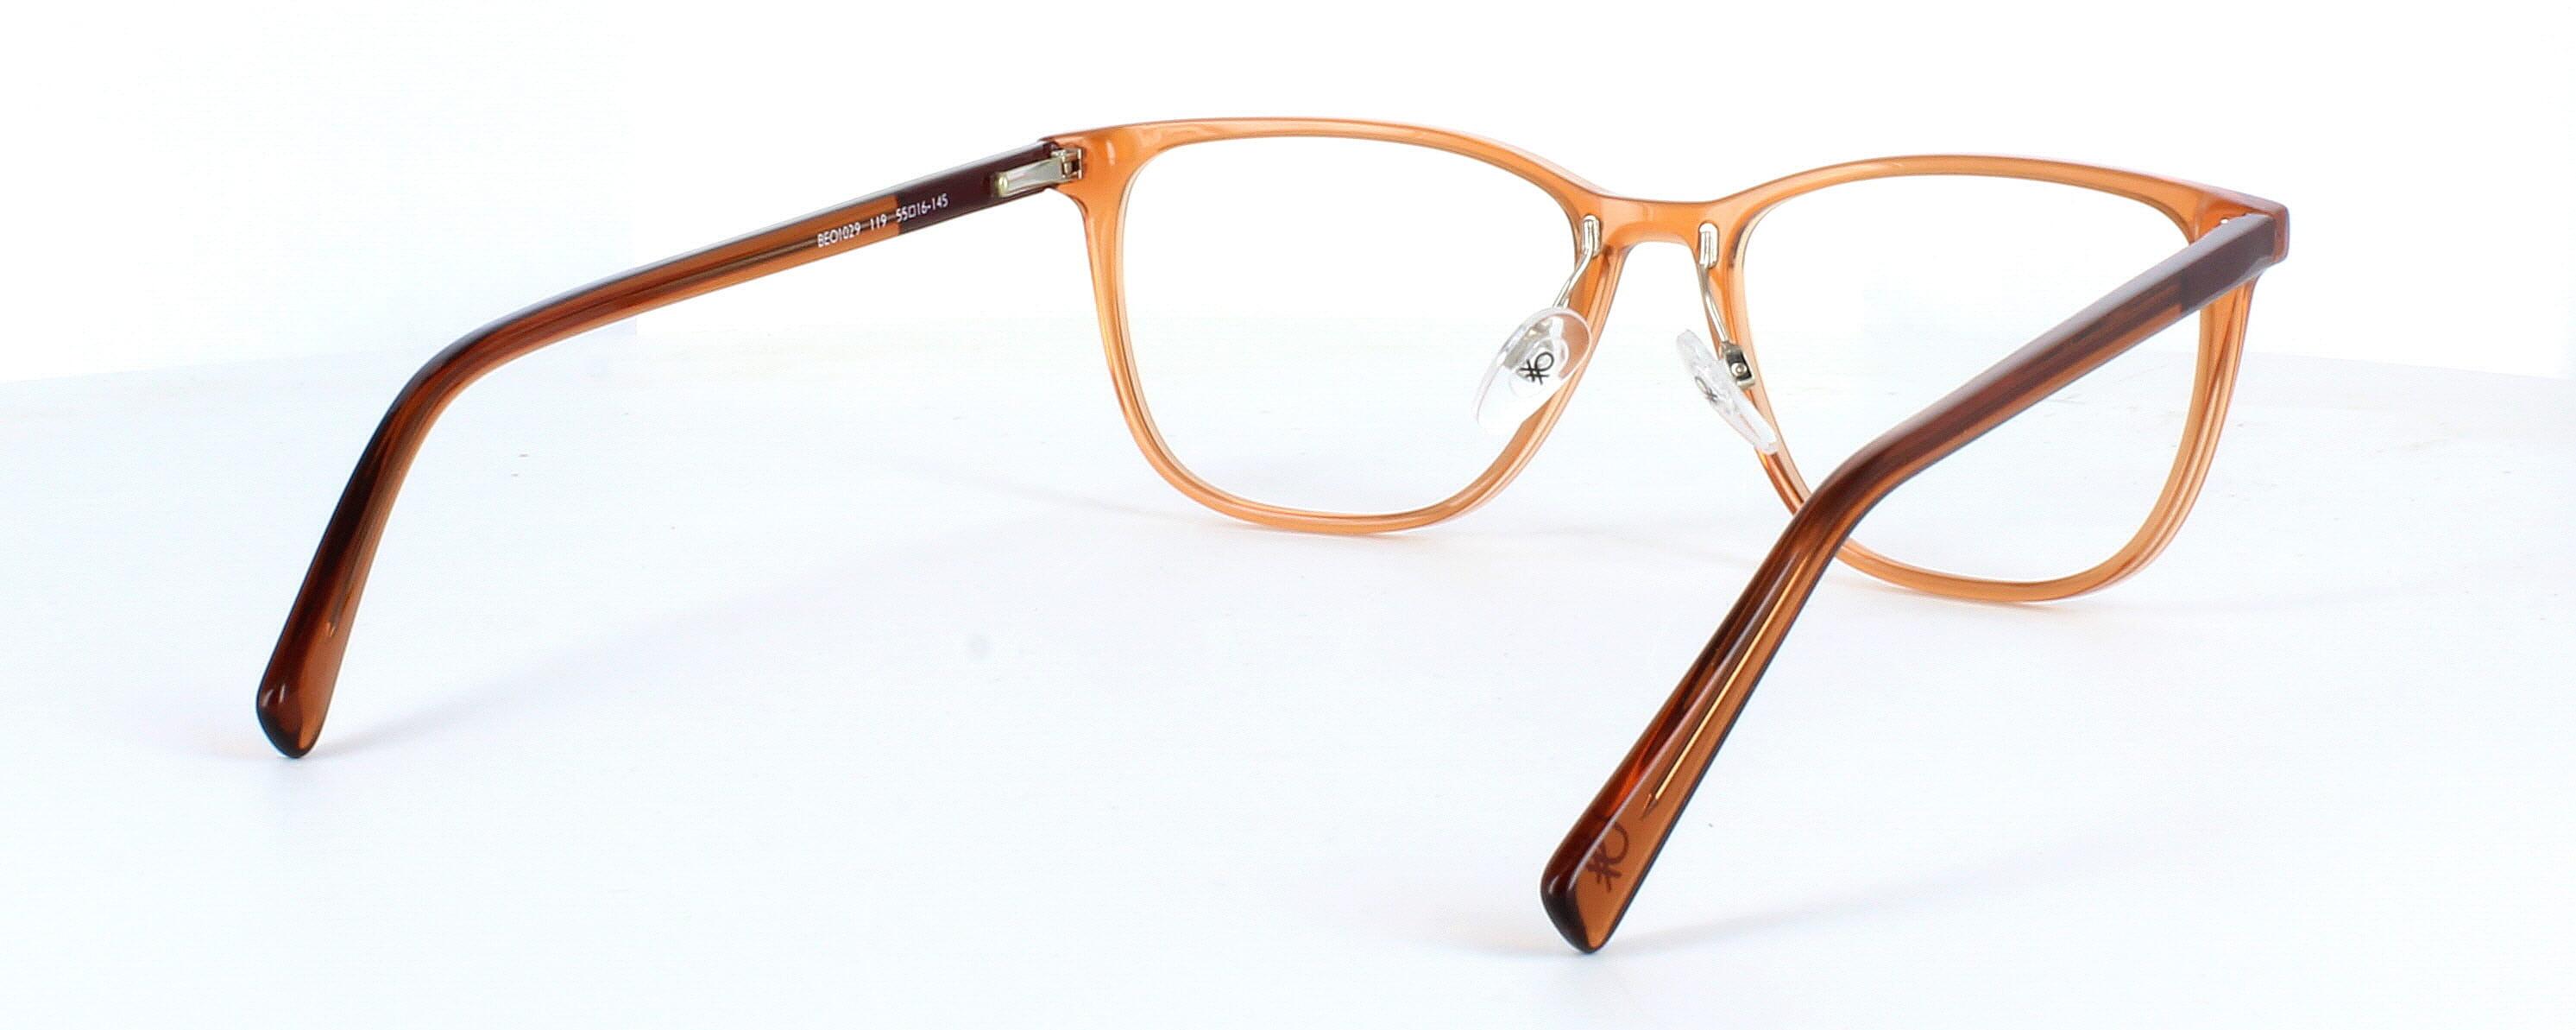 Benetton BEO1029 119 - Gent's crystal brown rectangular shaped glasses with sprung hinge temples - image view 5